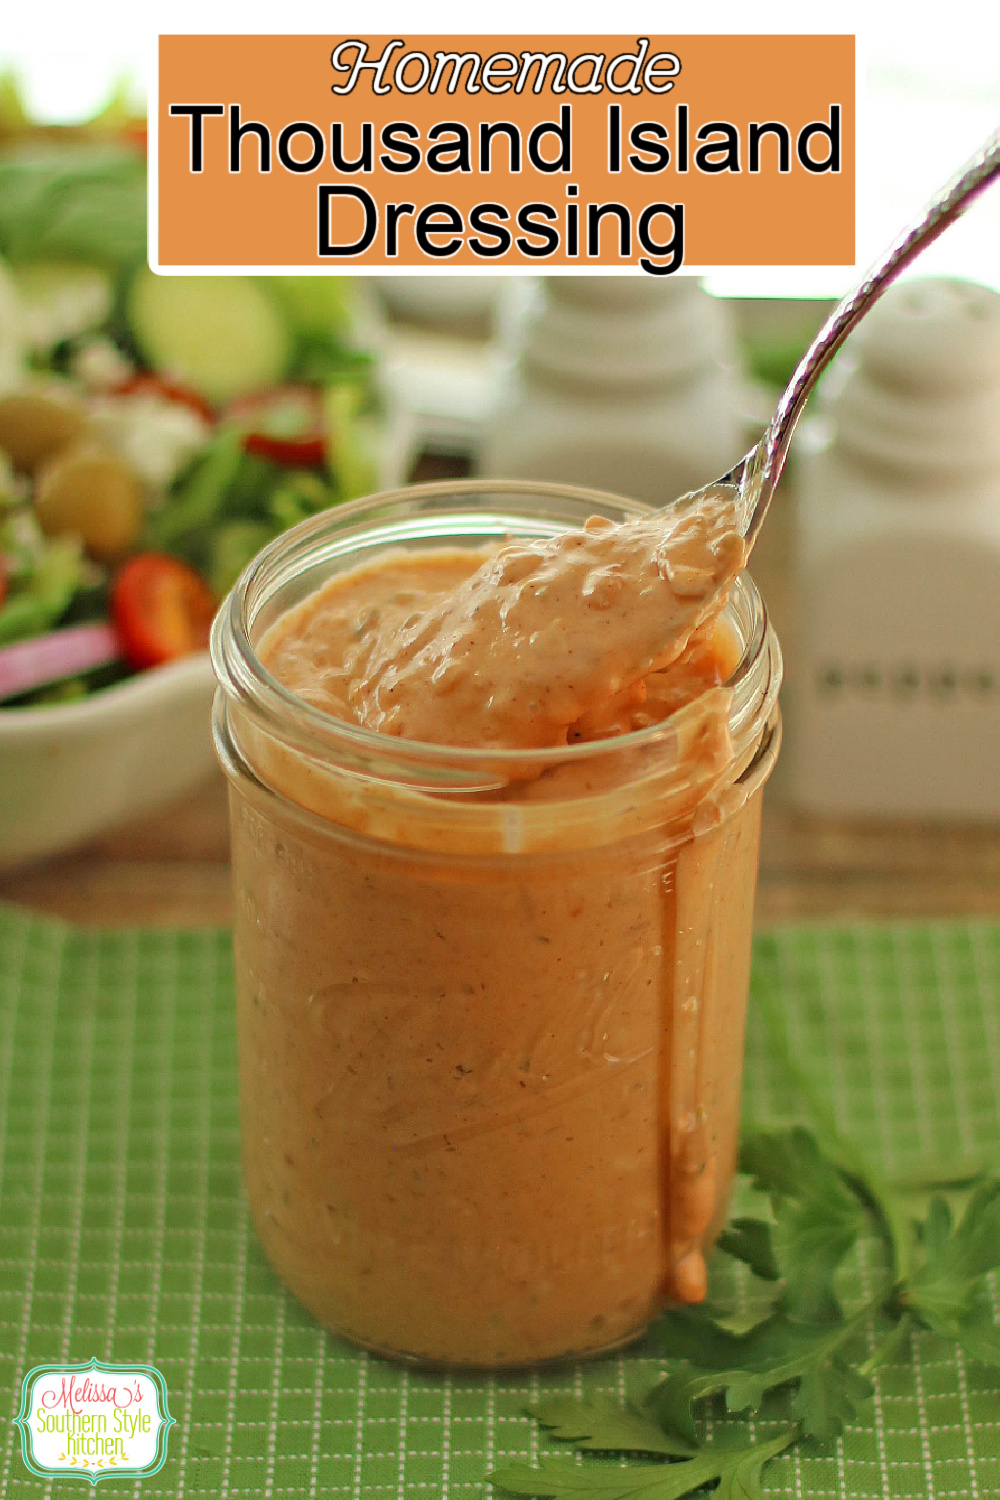 Use this easy Thousand Island Dressing as a salad dressing, sandwich spread or as a dip with your favorite fresh vegetables for snacking. #thousandislanddressing #easysaladrecipes #homemadethousandisland #easyrecipes #southernrecipes #dressingrecipes #dressing #diprecipes via @melissasssk